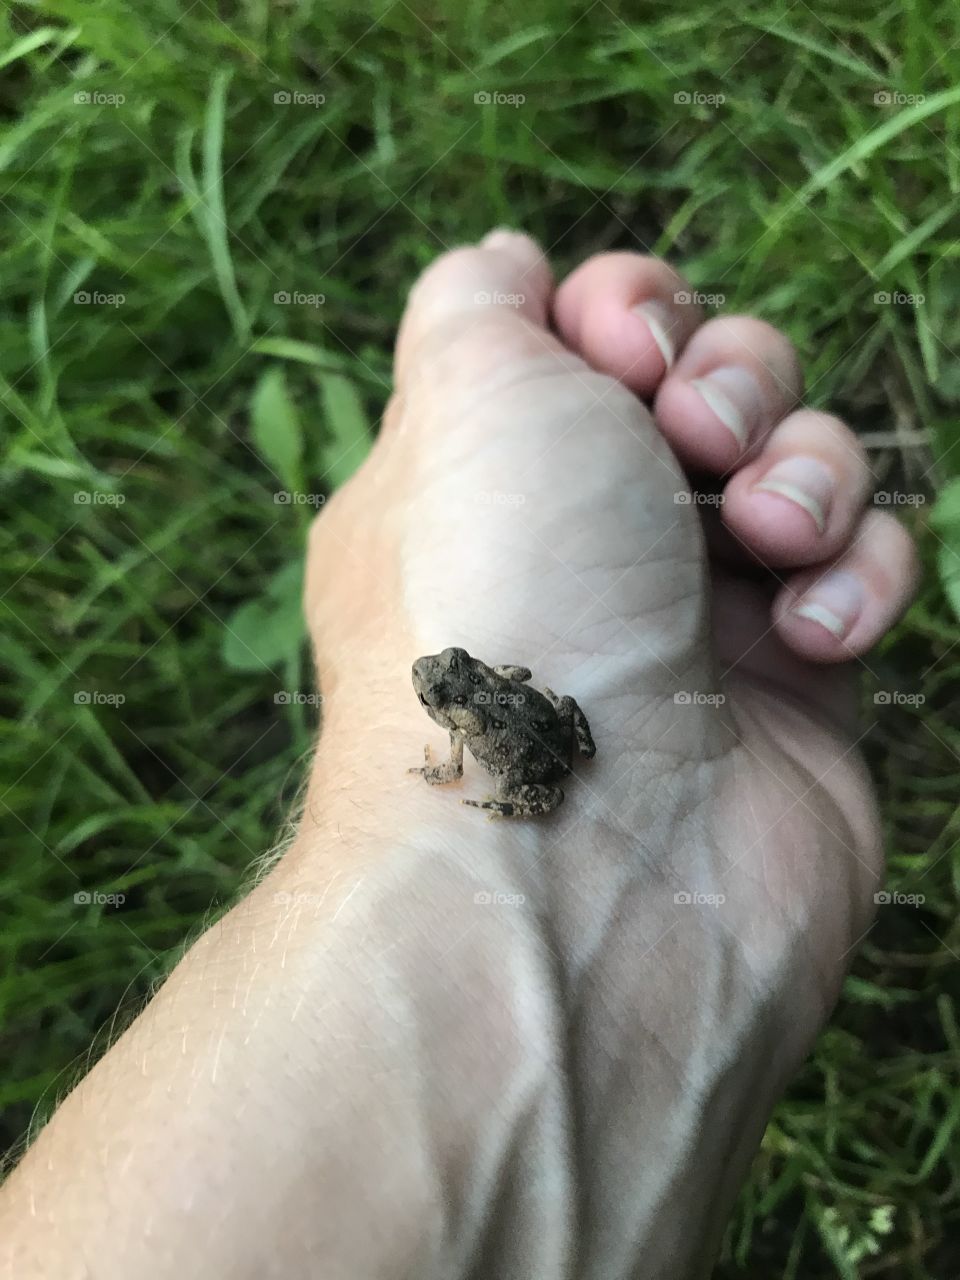 Teeny tiny little frog resting on my hand. 